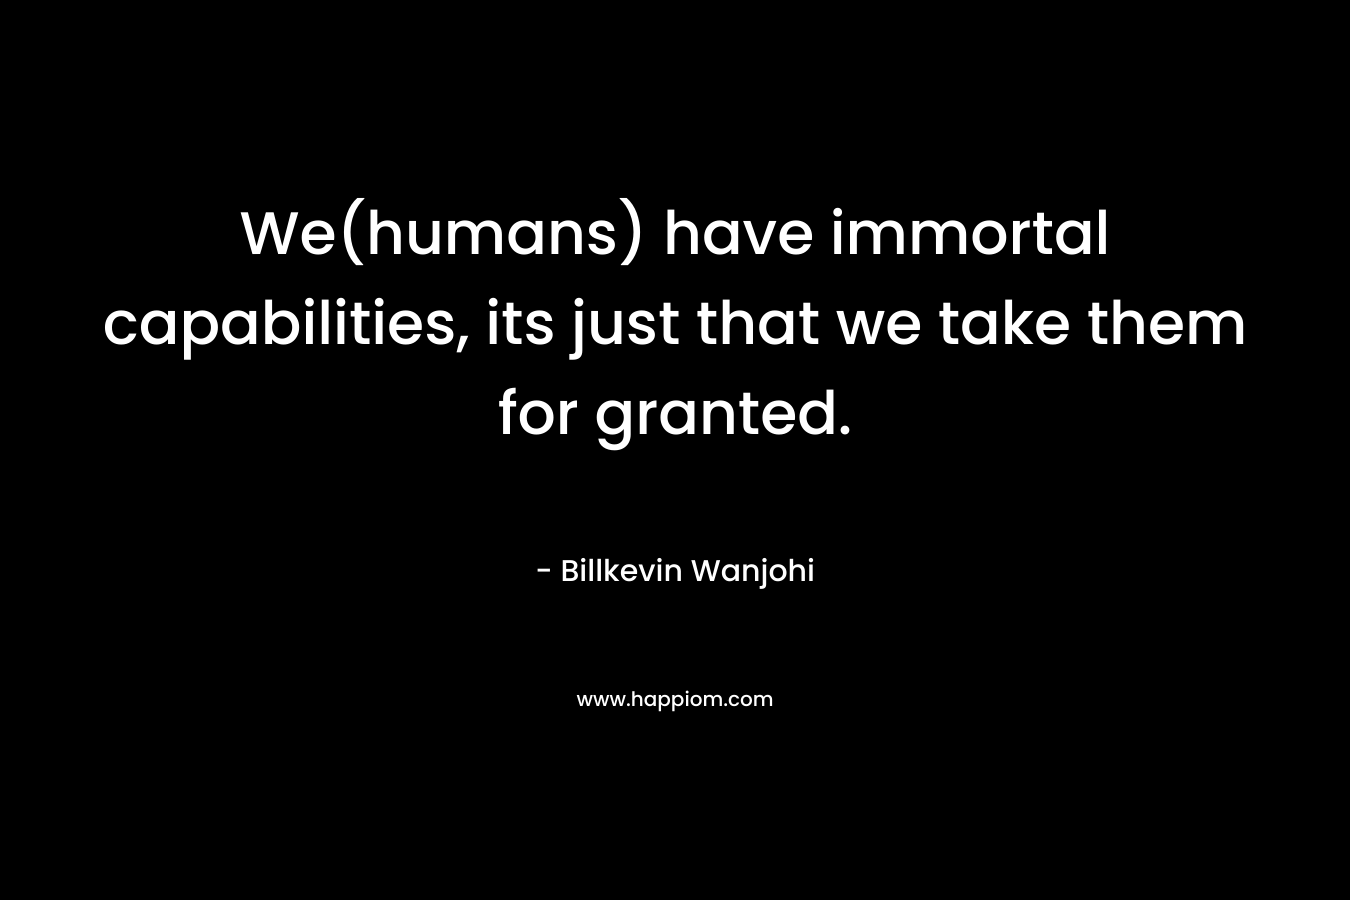 We(humans) have immortal capabilities, its just that we take them for granted. – Billkevin Wanjohi